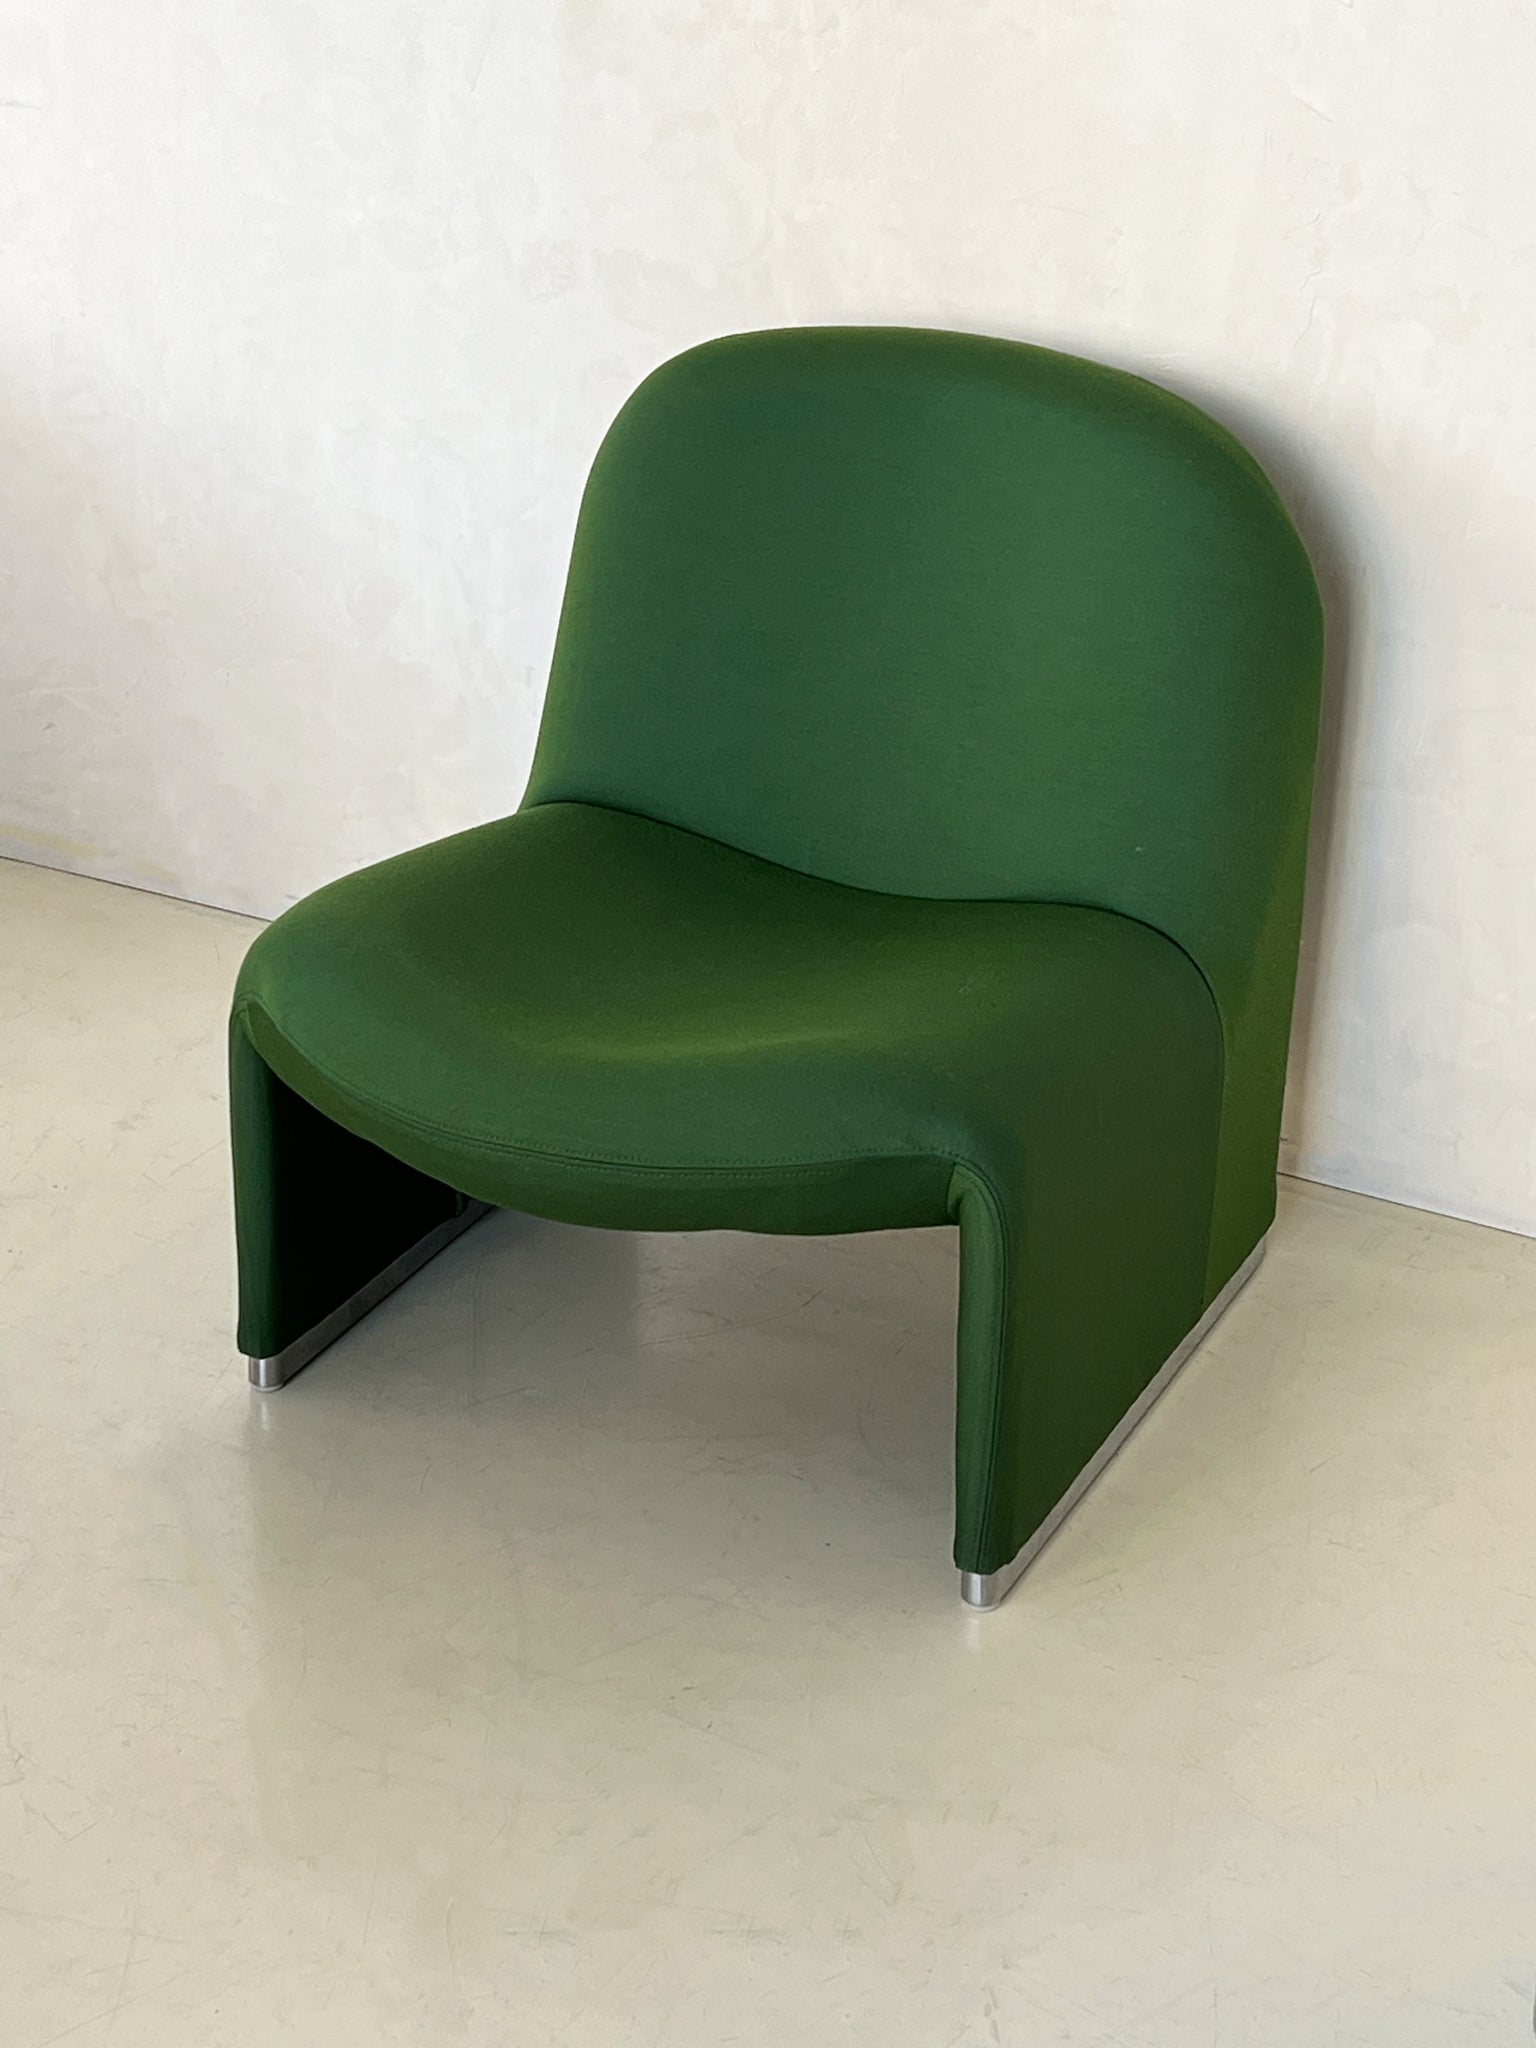 Vintage Green Alky Chair by Giancarlo Piretti